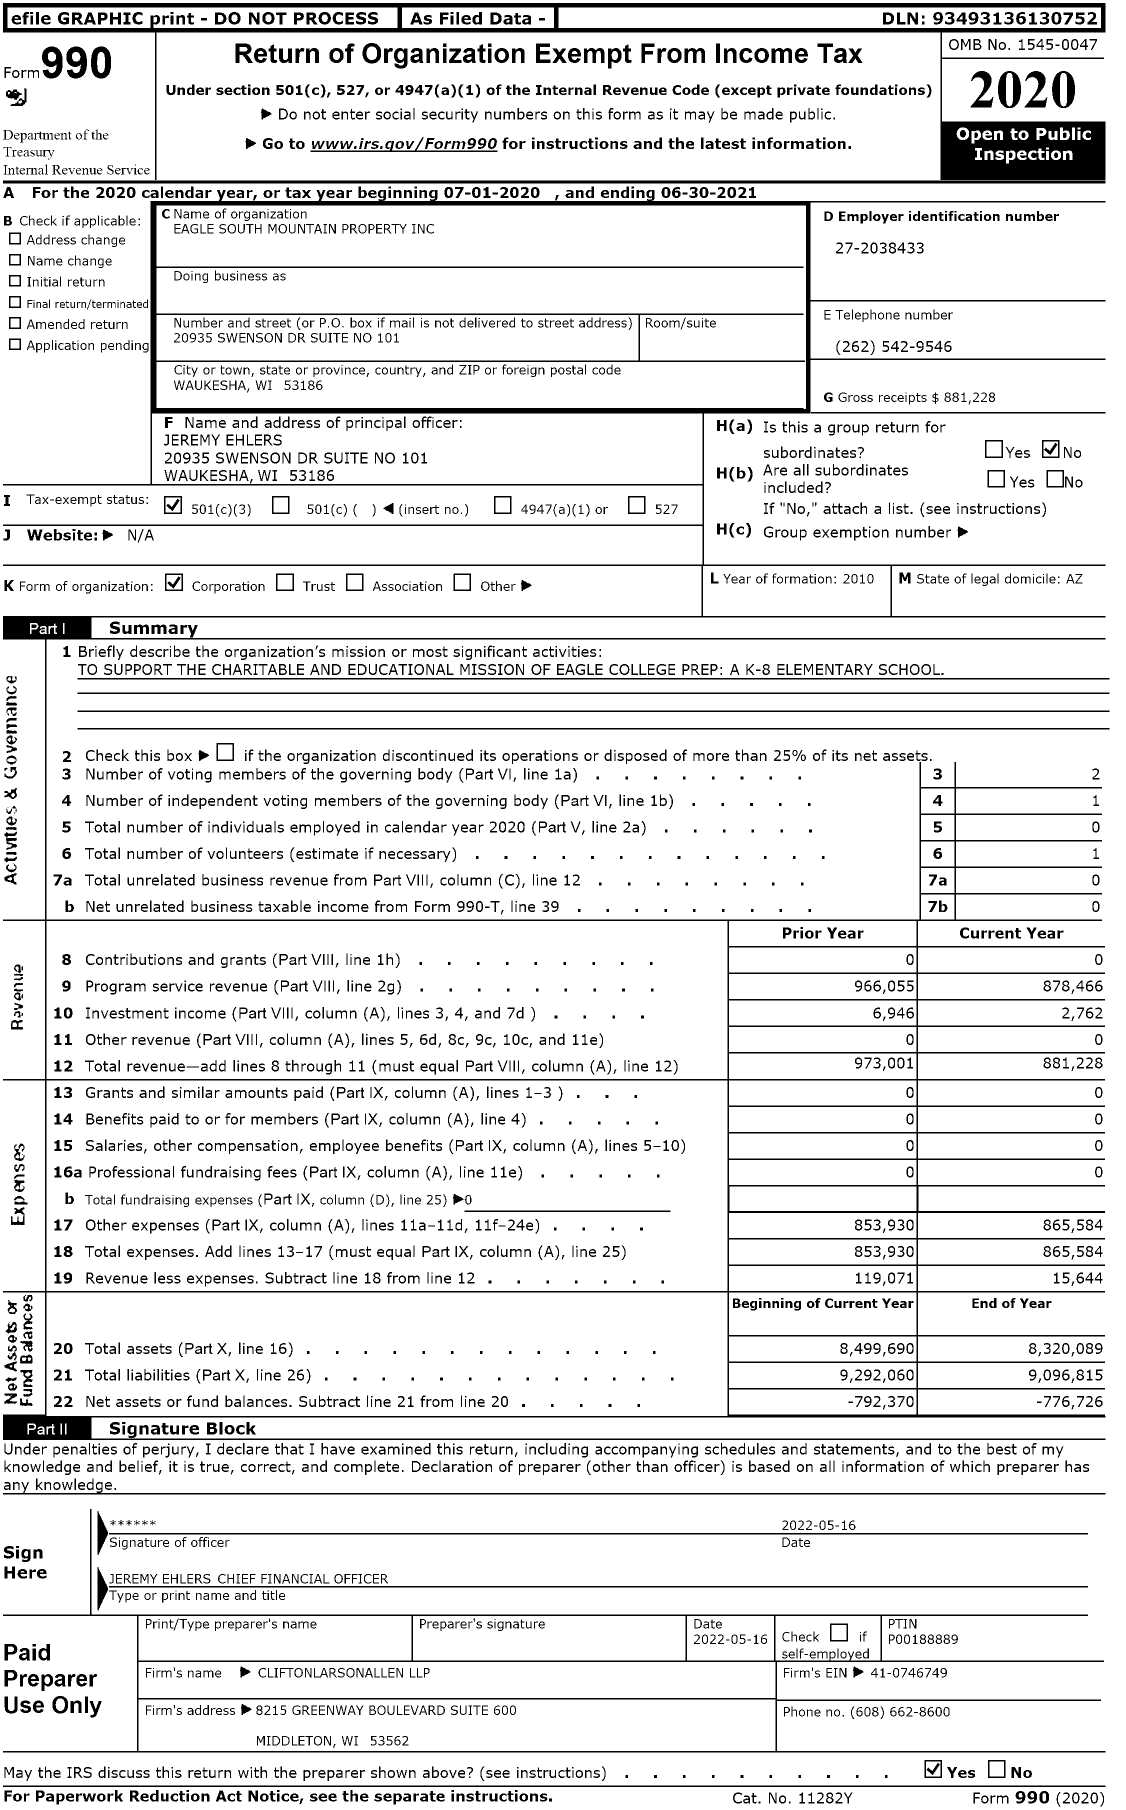 Image of first page of 2020 Form 990 for Eagle South Mountain Property